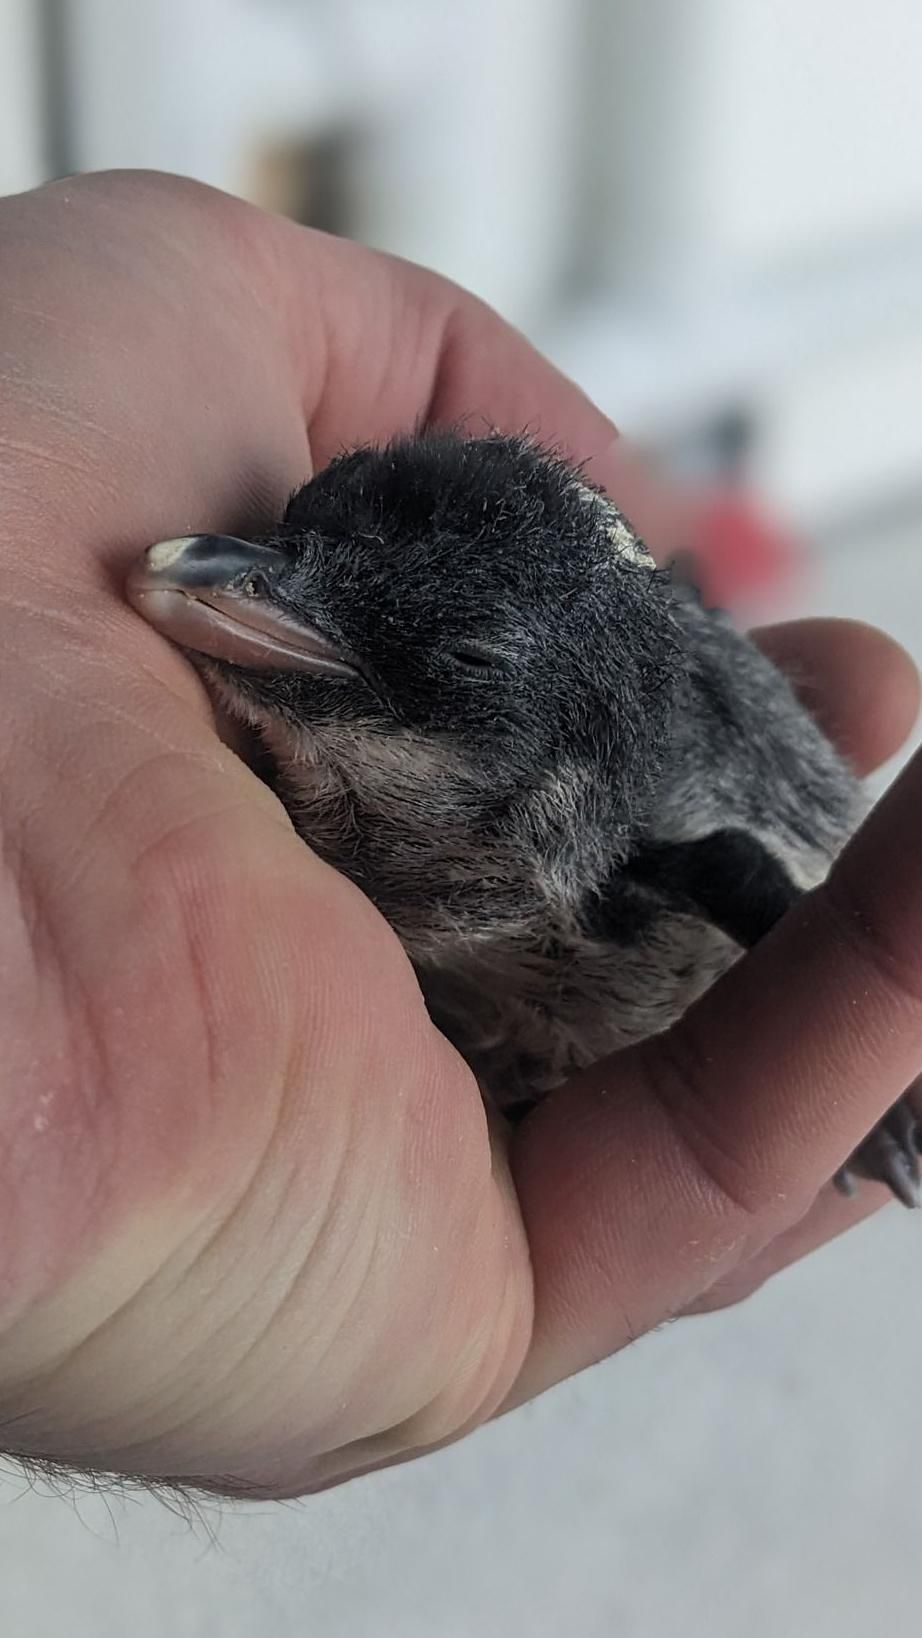 A tiny penguin chick lays down in a man's hand